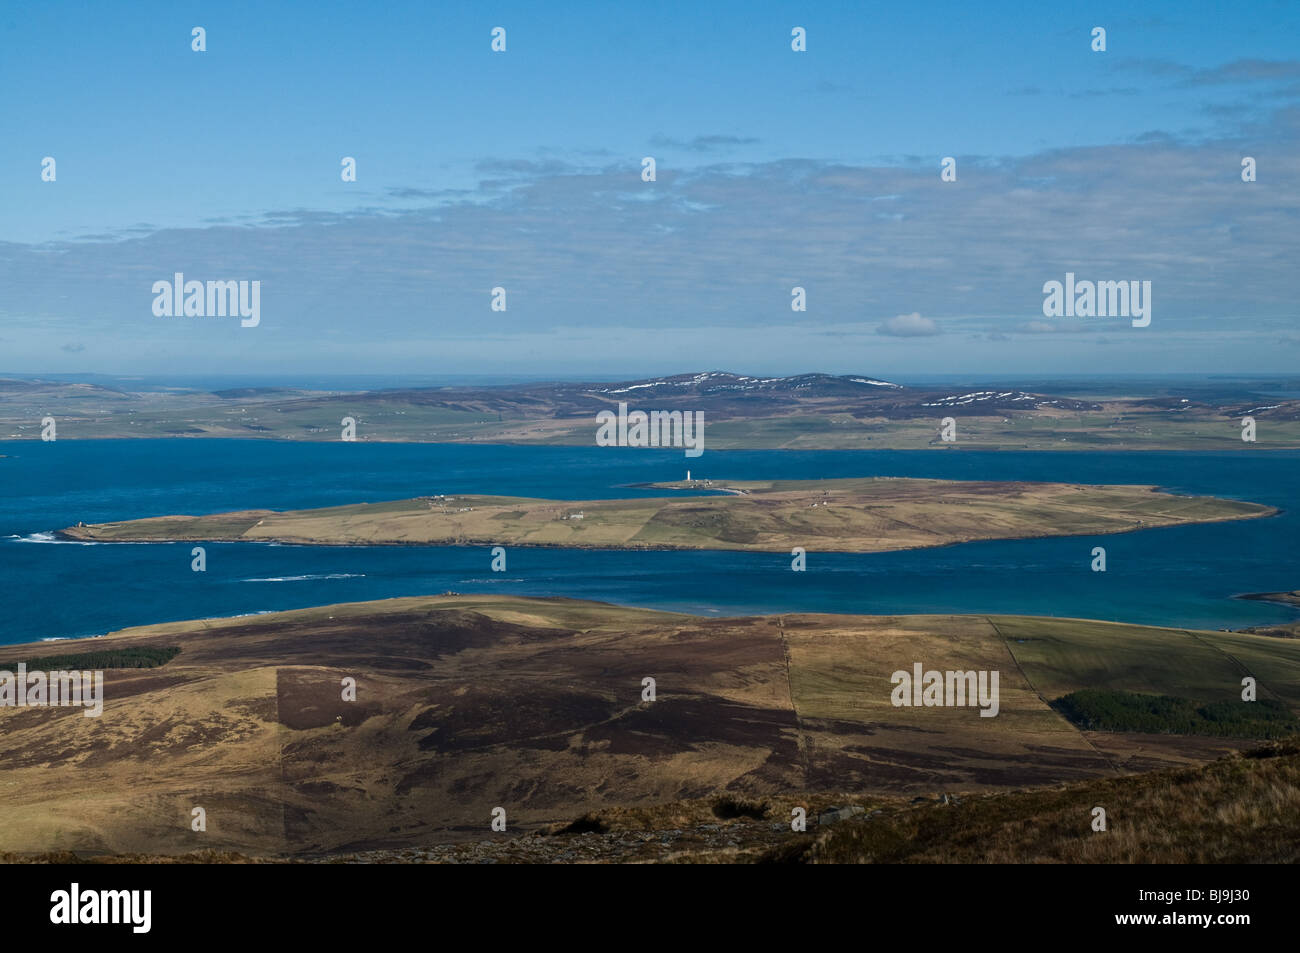 dh  GRAEMSAY ORKNEY View of Graemsay island and Orkney mainland from Cuilags Hoy hills scapa flow landscape scottish islands Stock Photo